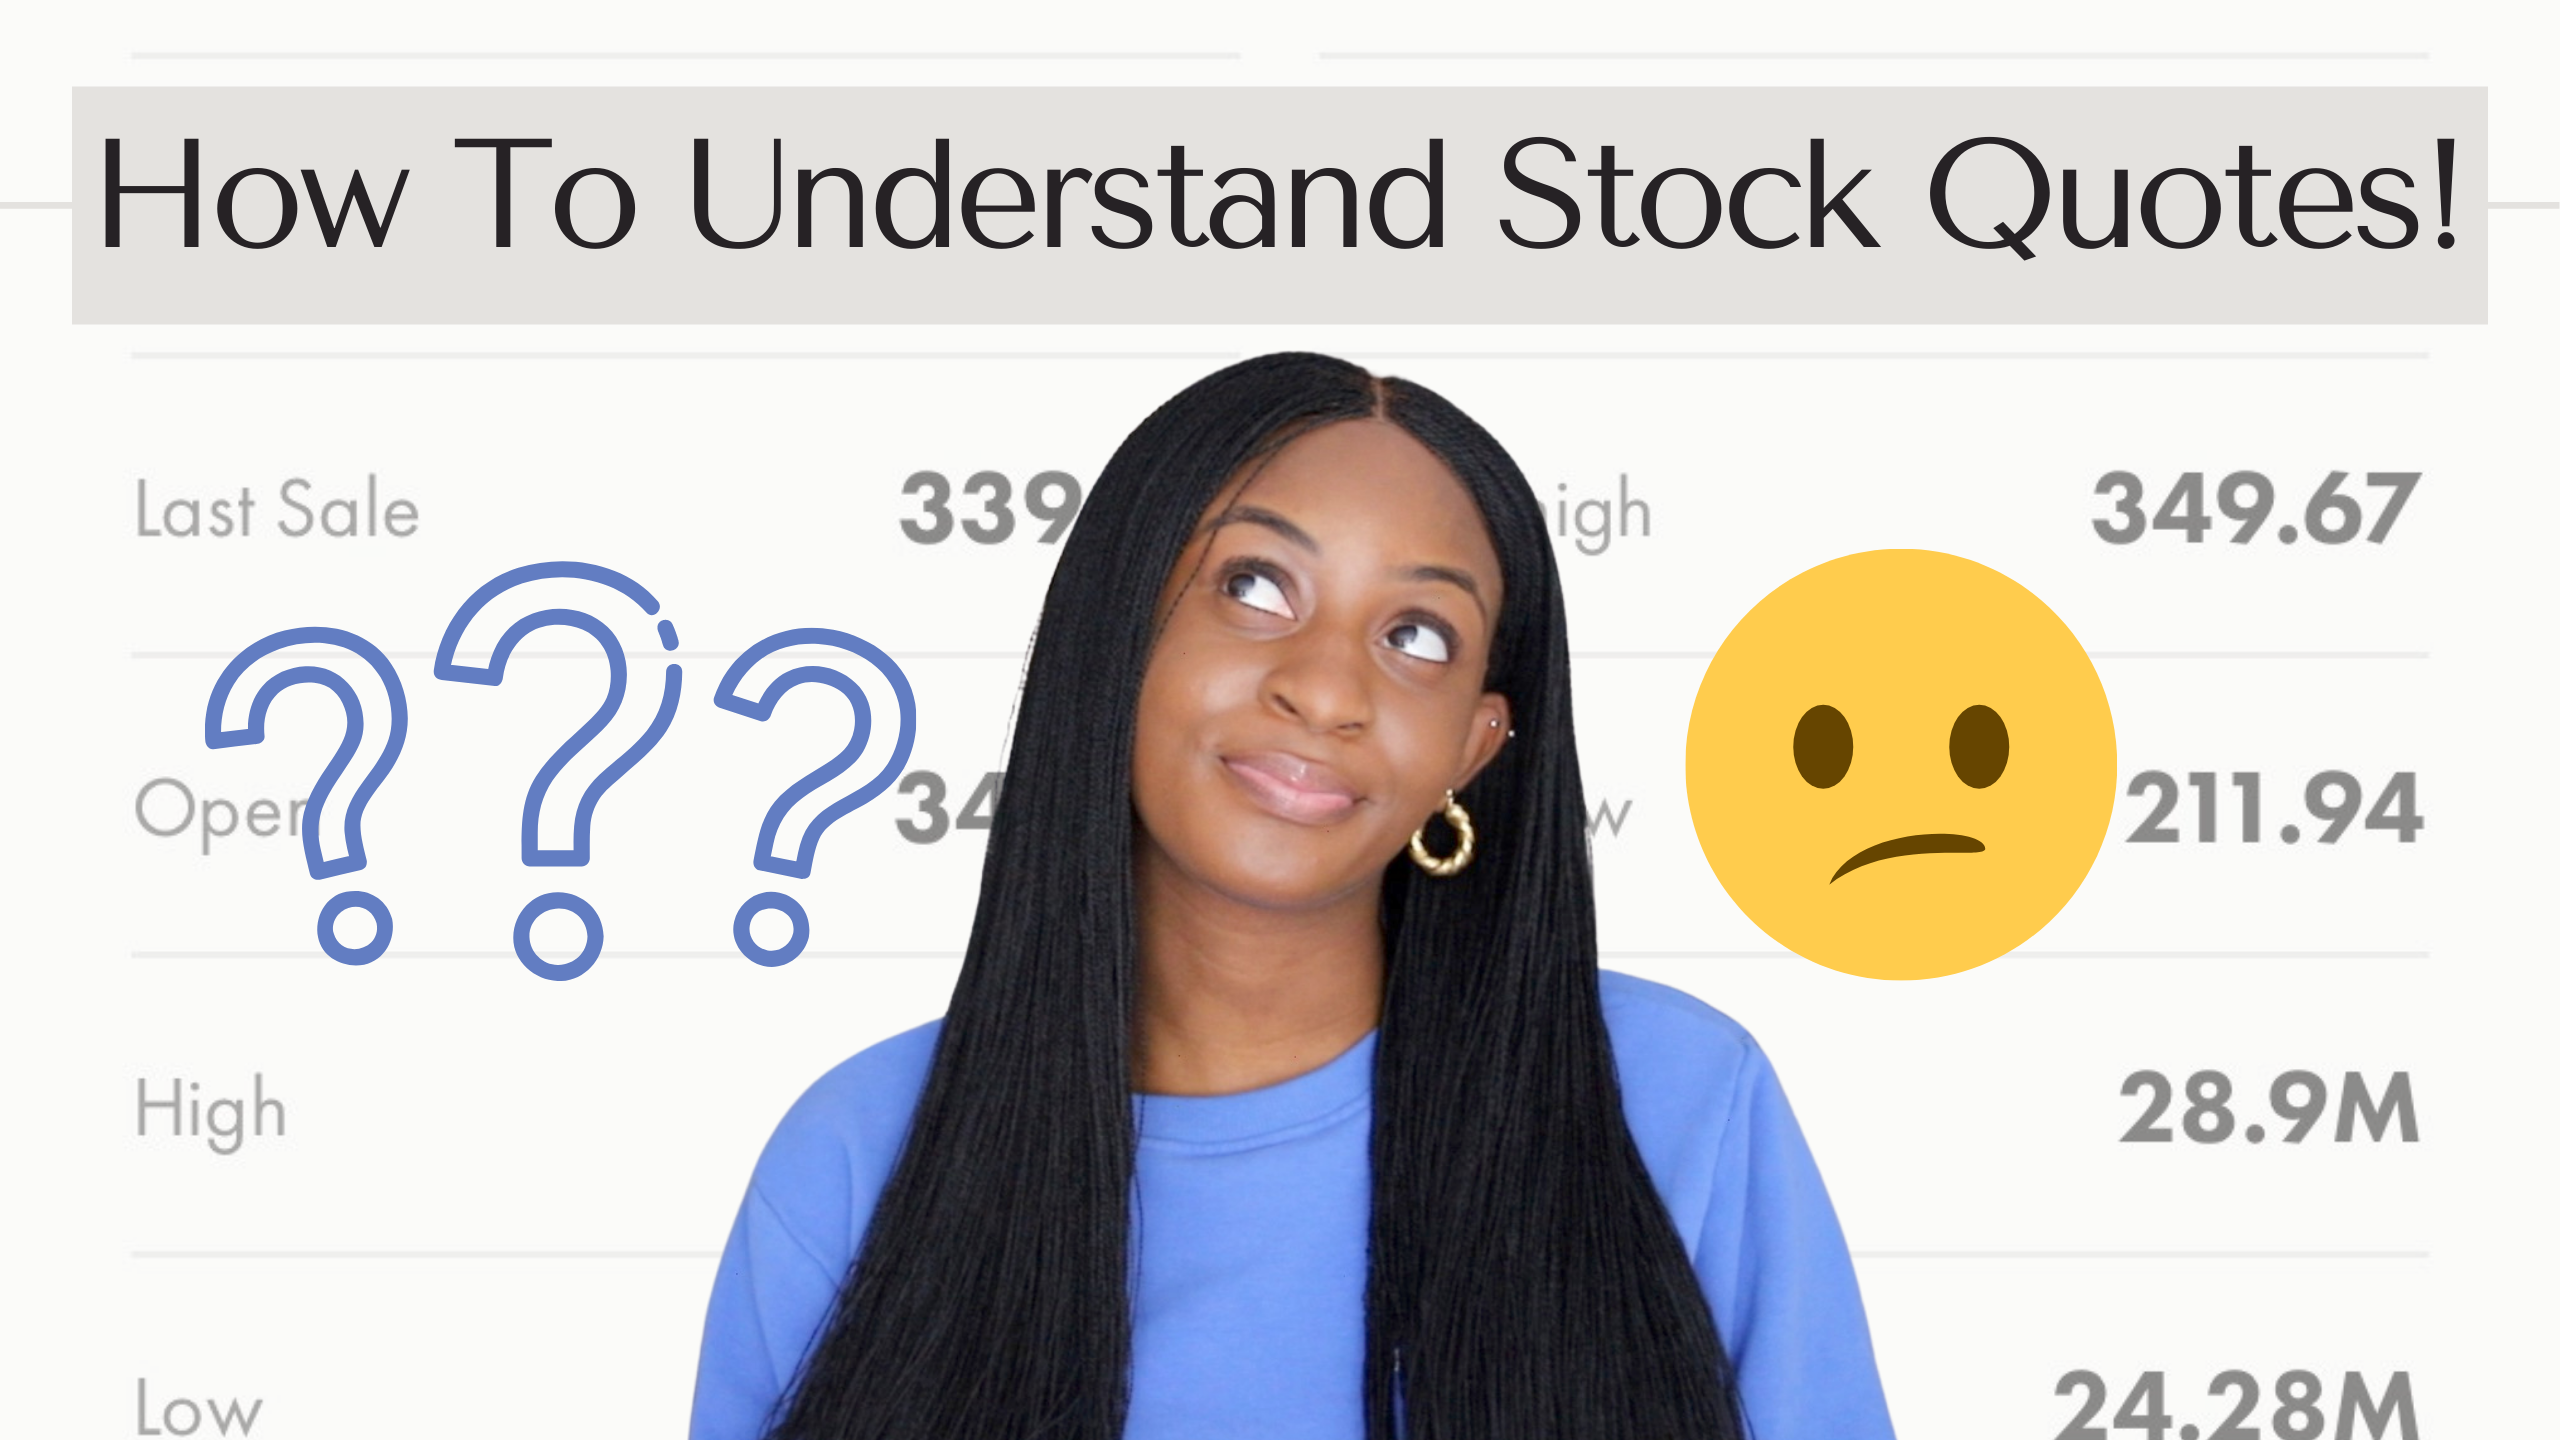 How To Understand Stock Quotes